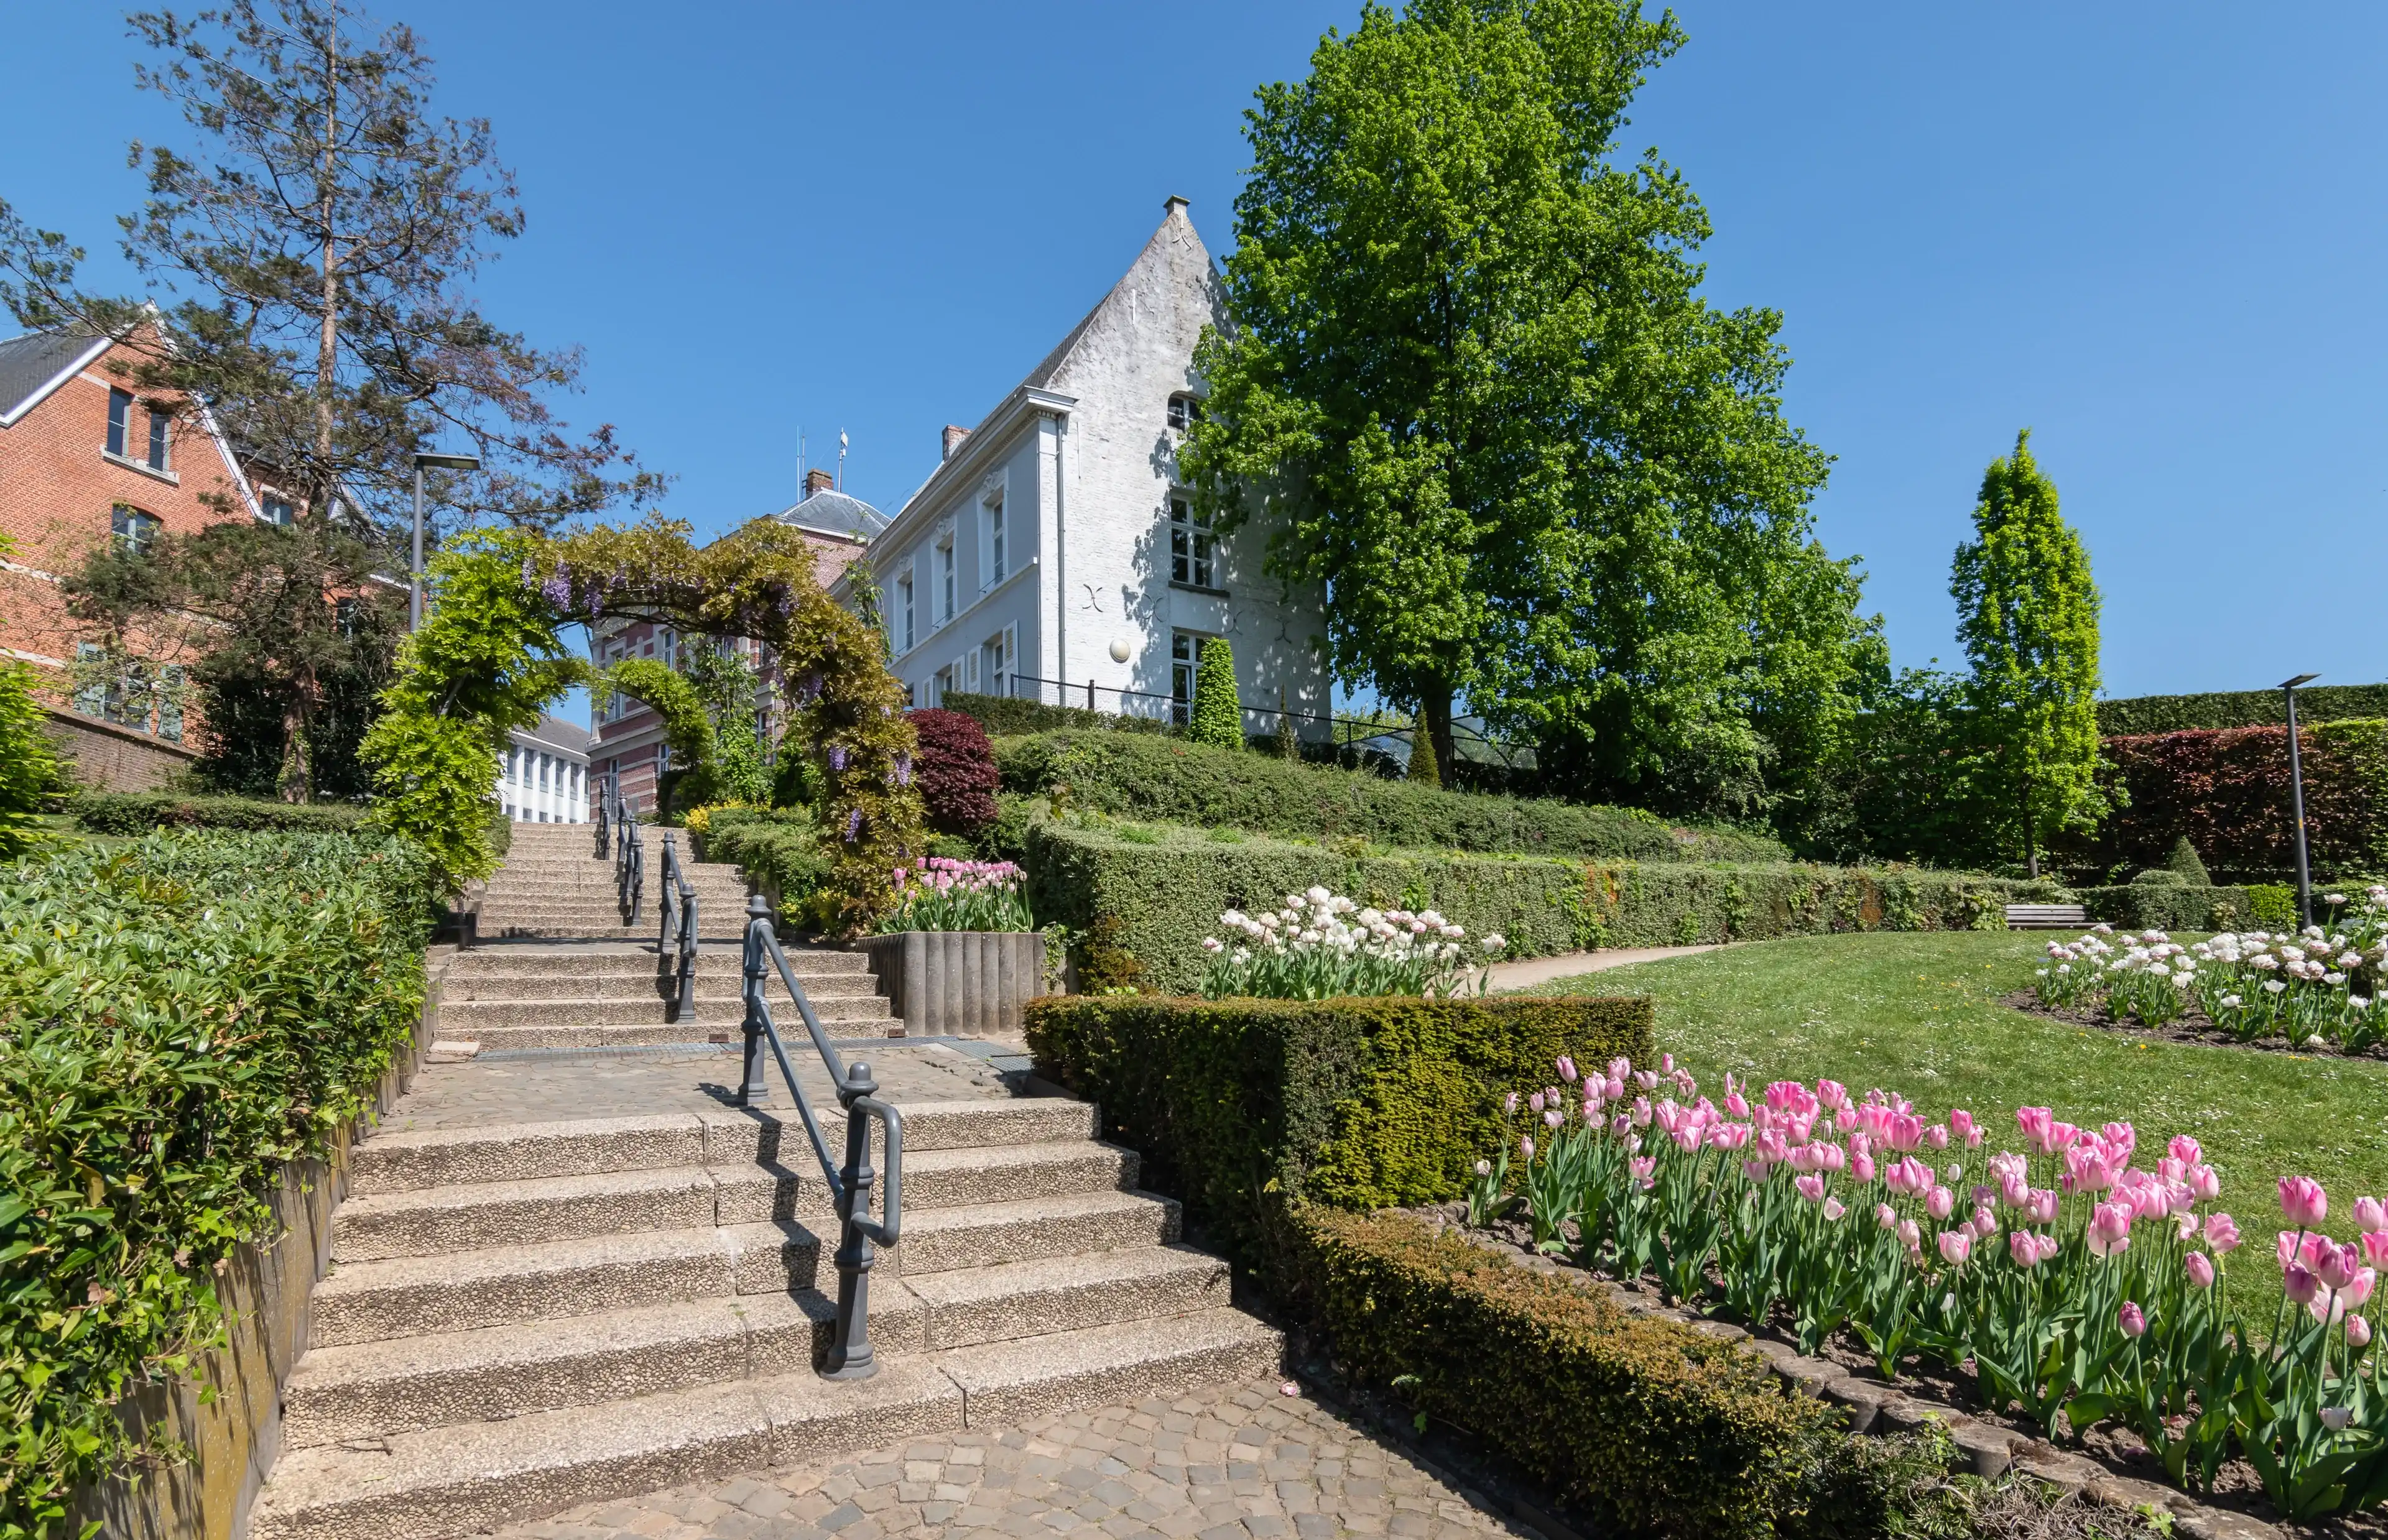 Public park with stairs and a beautiful landscaped spring garden located on the mountain in the village center of Heist-op-den-Berg, province of Antwerp, Belgium.